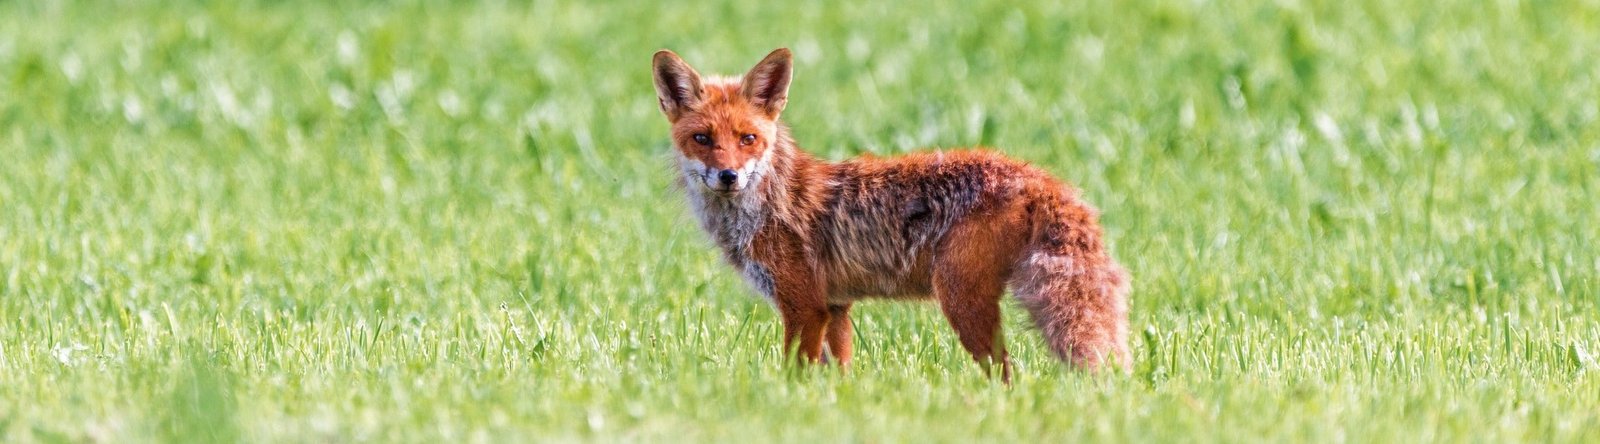 Photograph of a red fox 